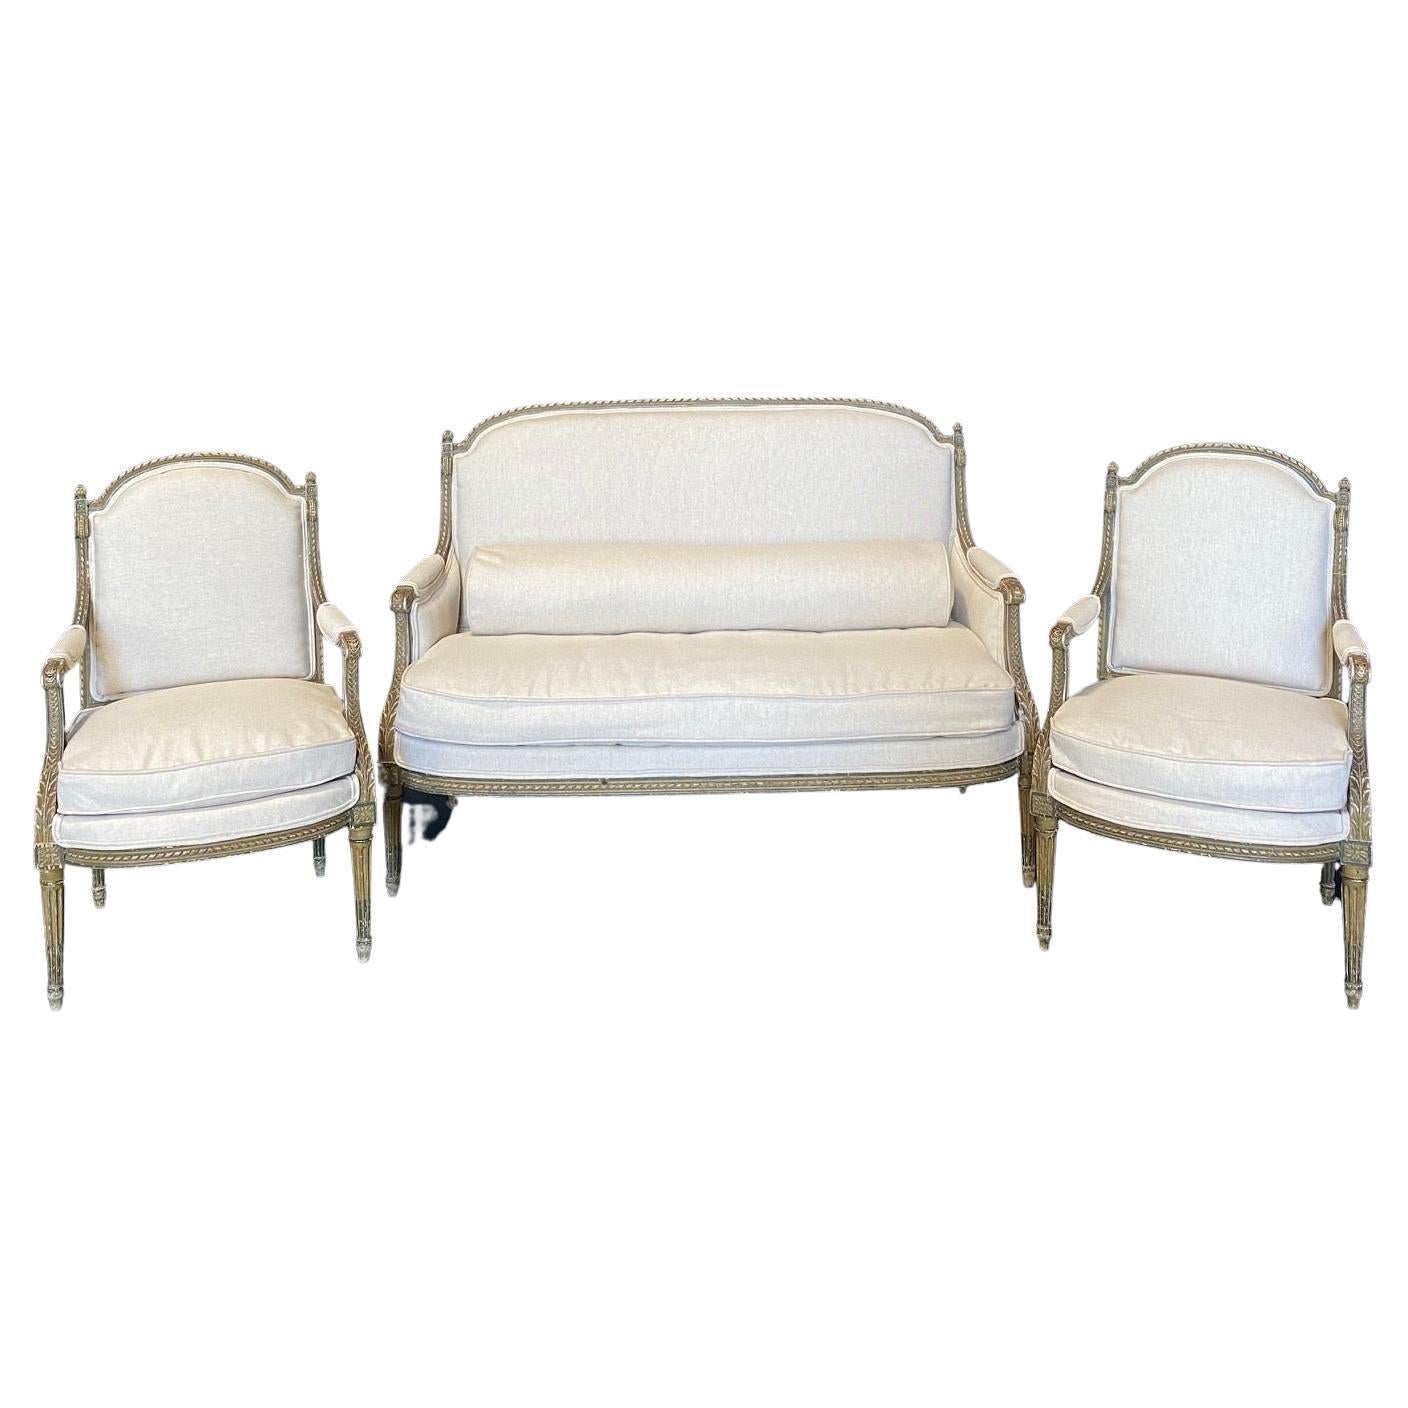 Superbly Elegant French 19th Century Louis XVI Parlor Set with Sofa & Armchairs